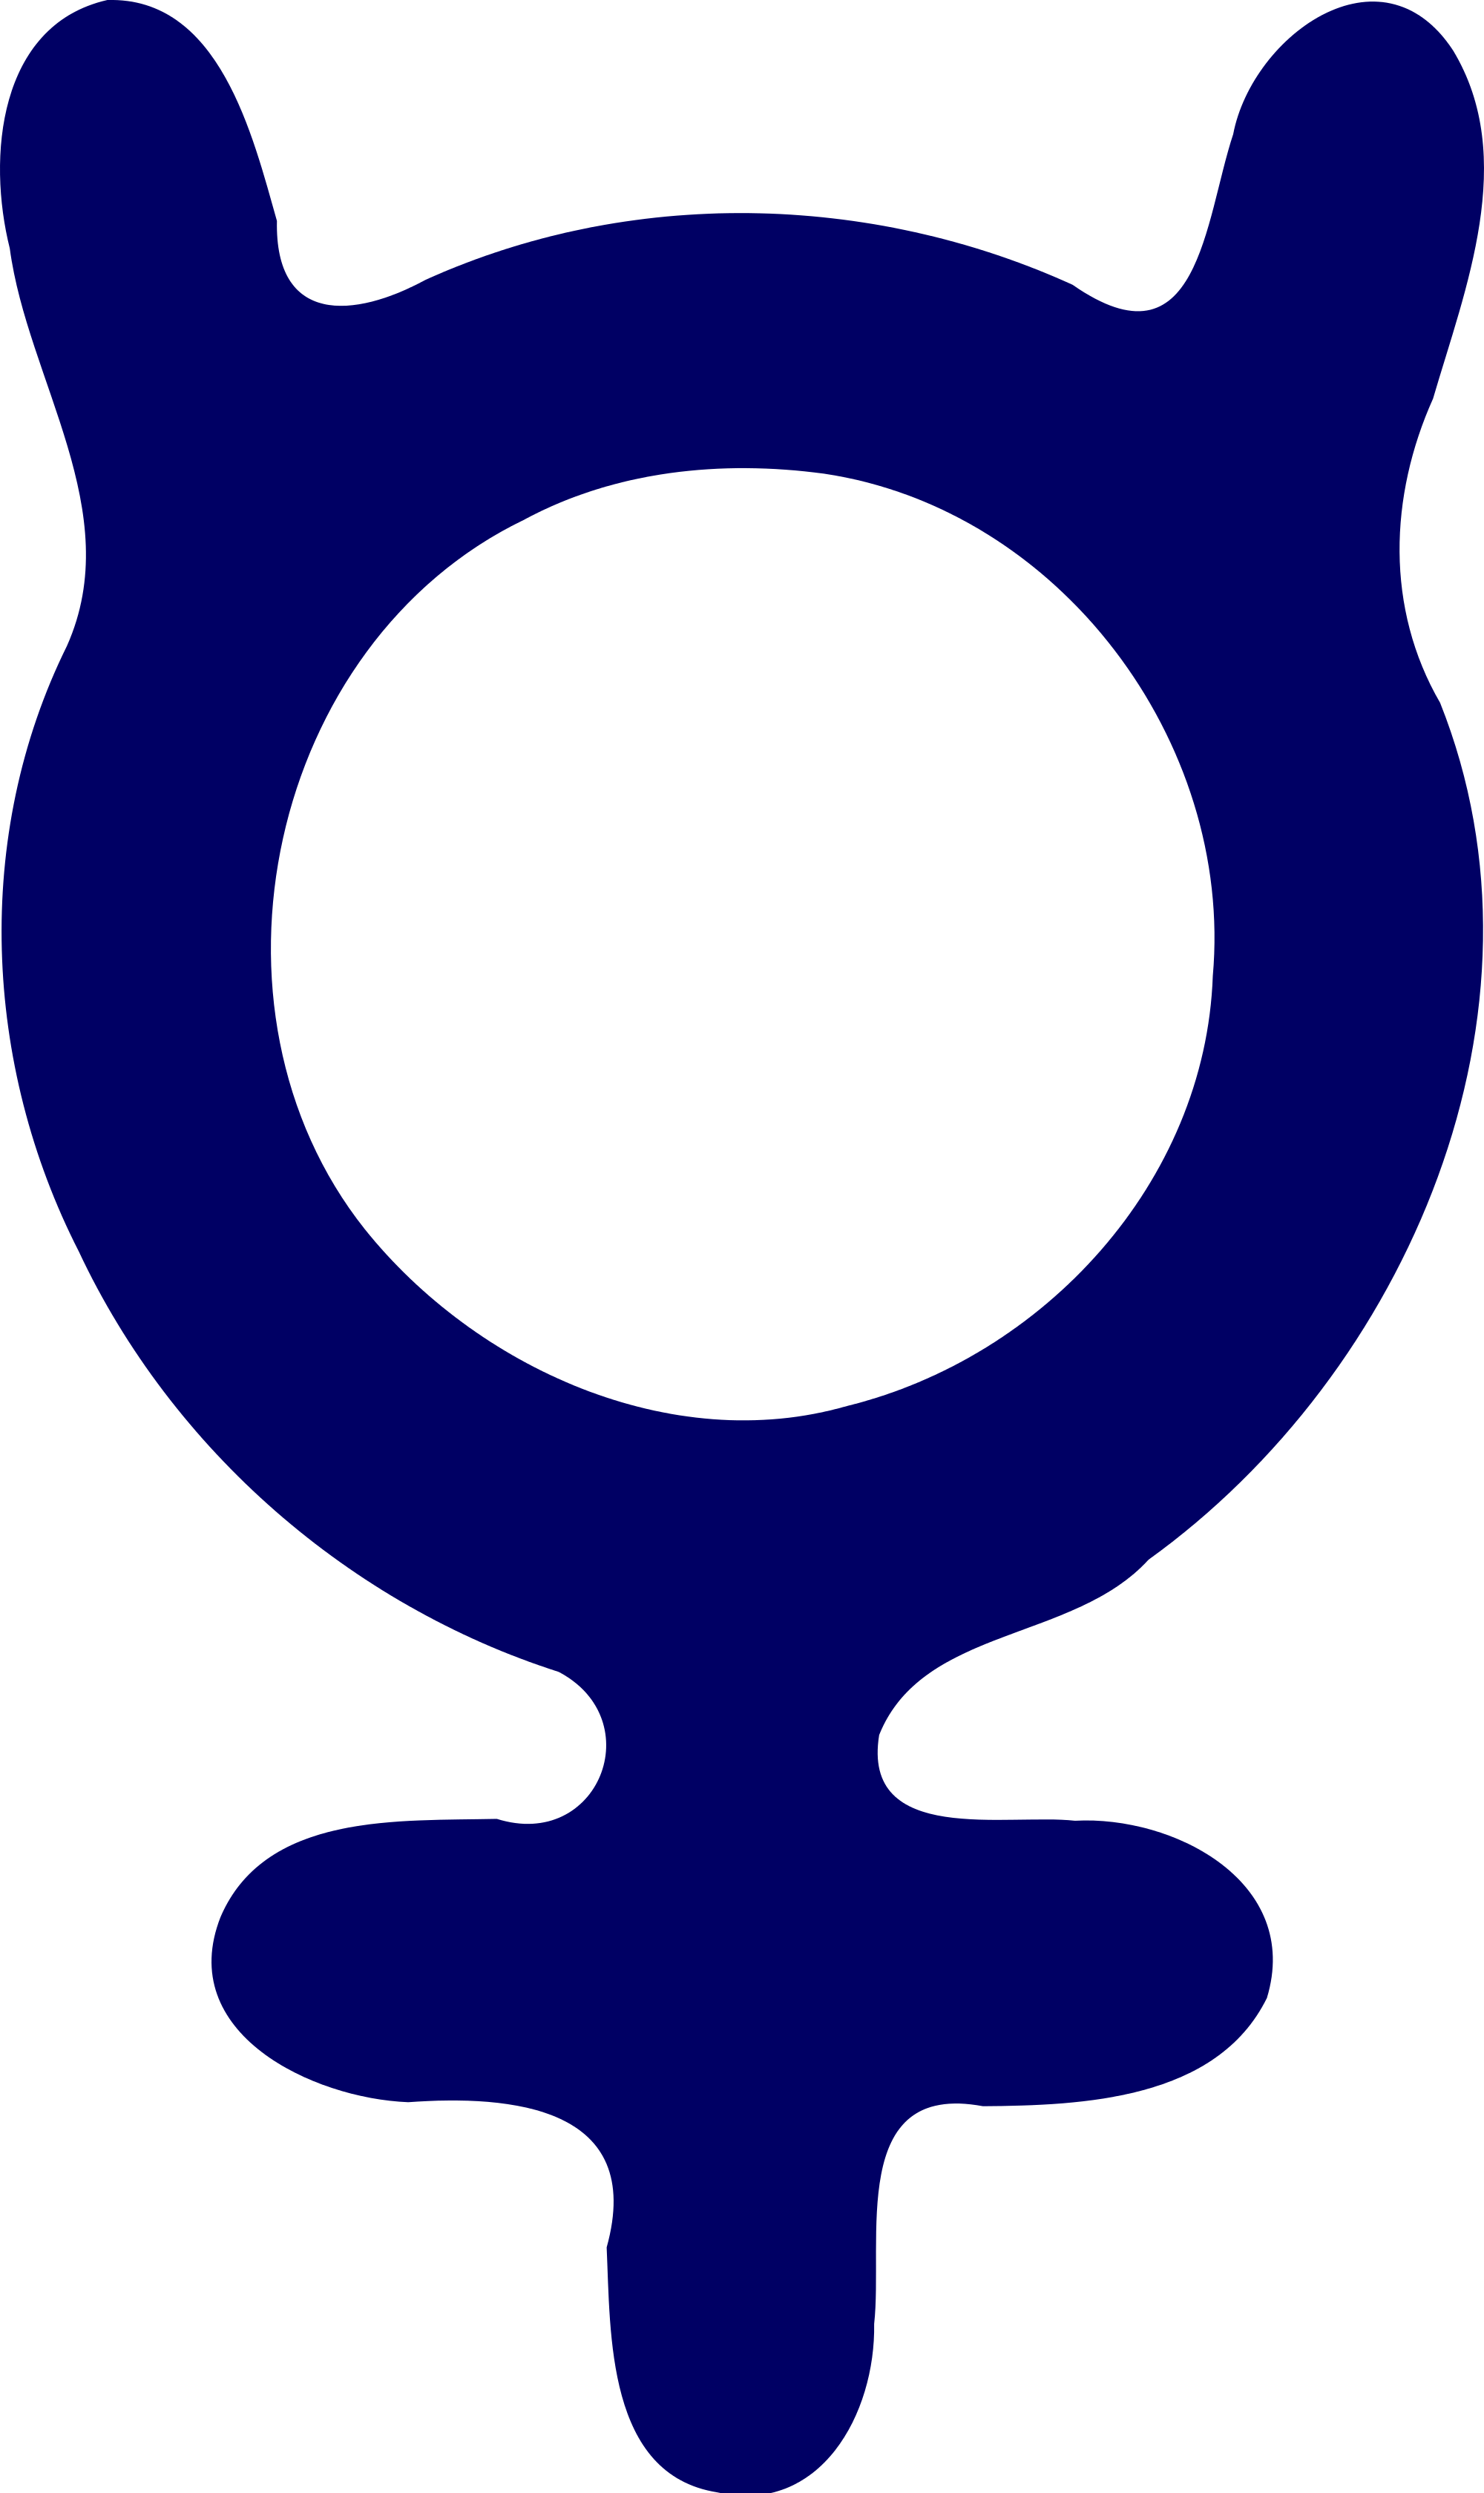 A Blue Symbol With A Black Background